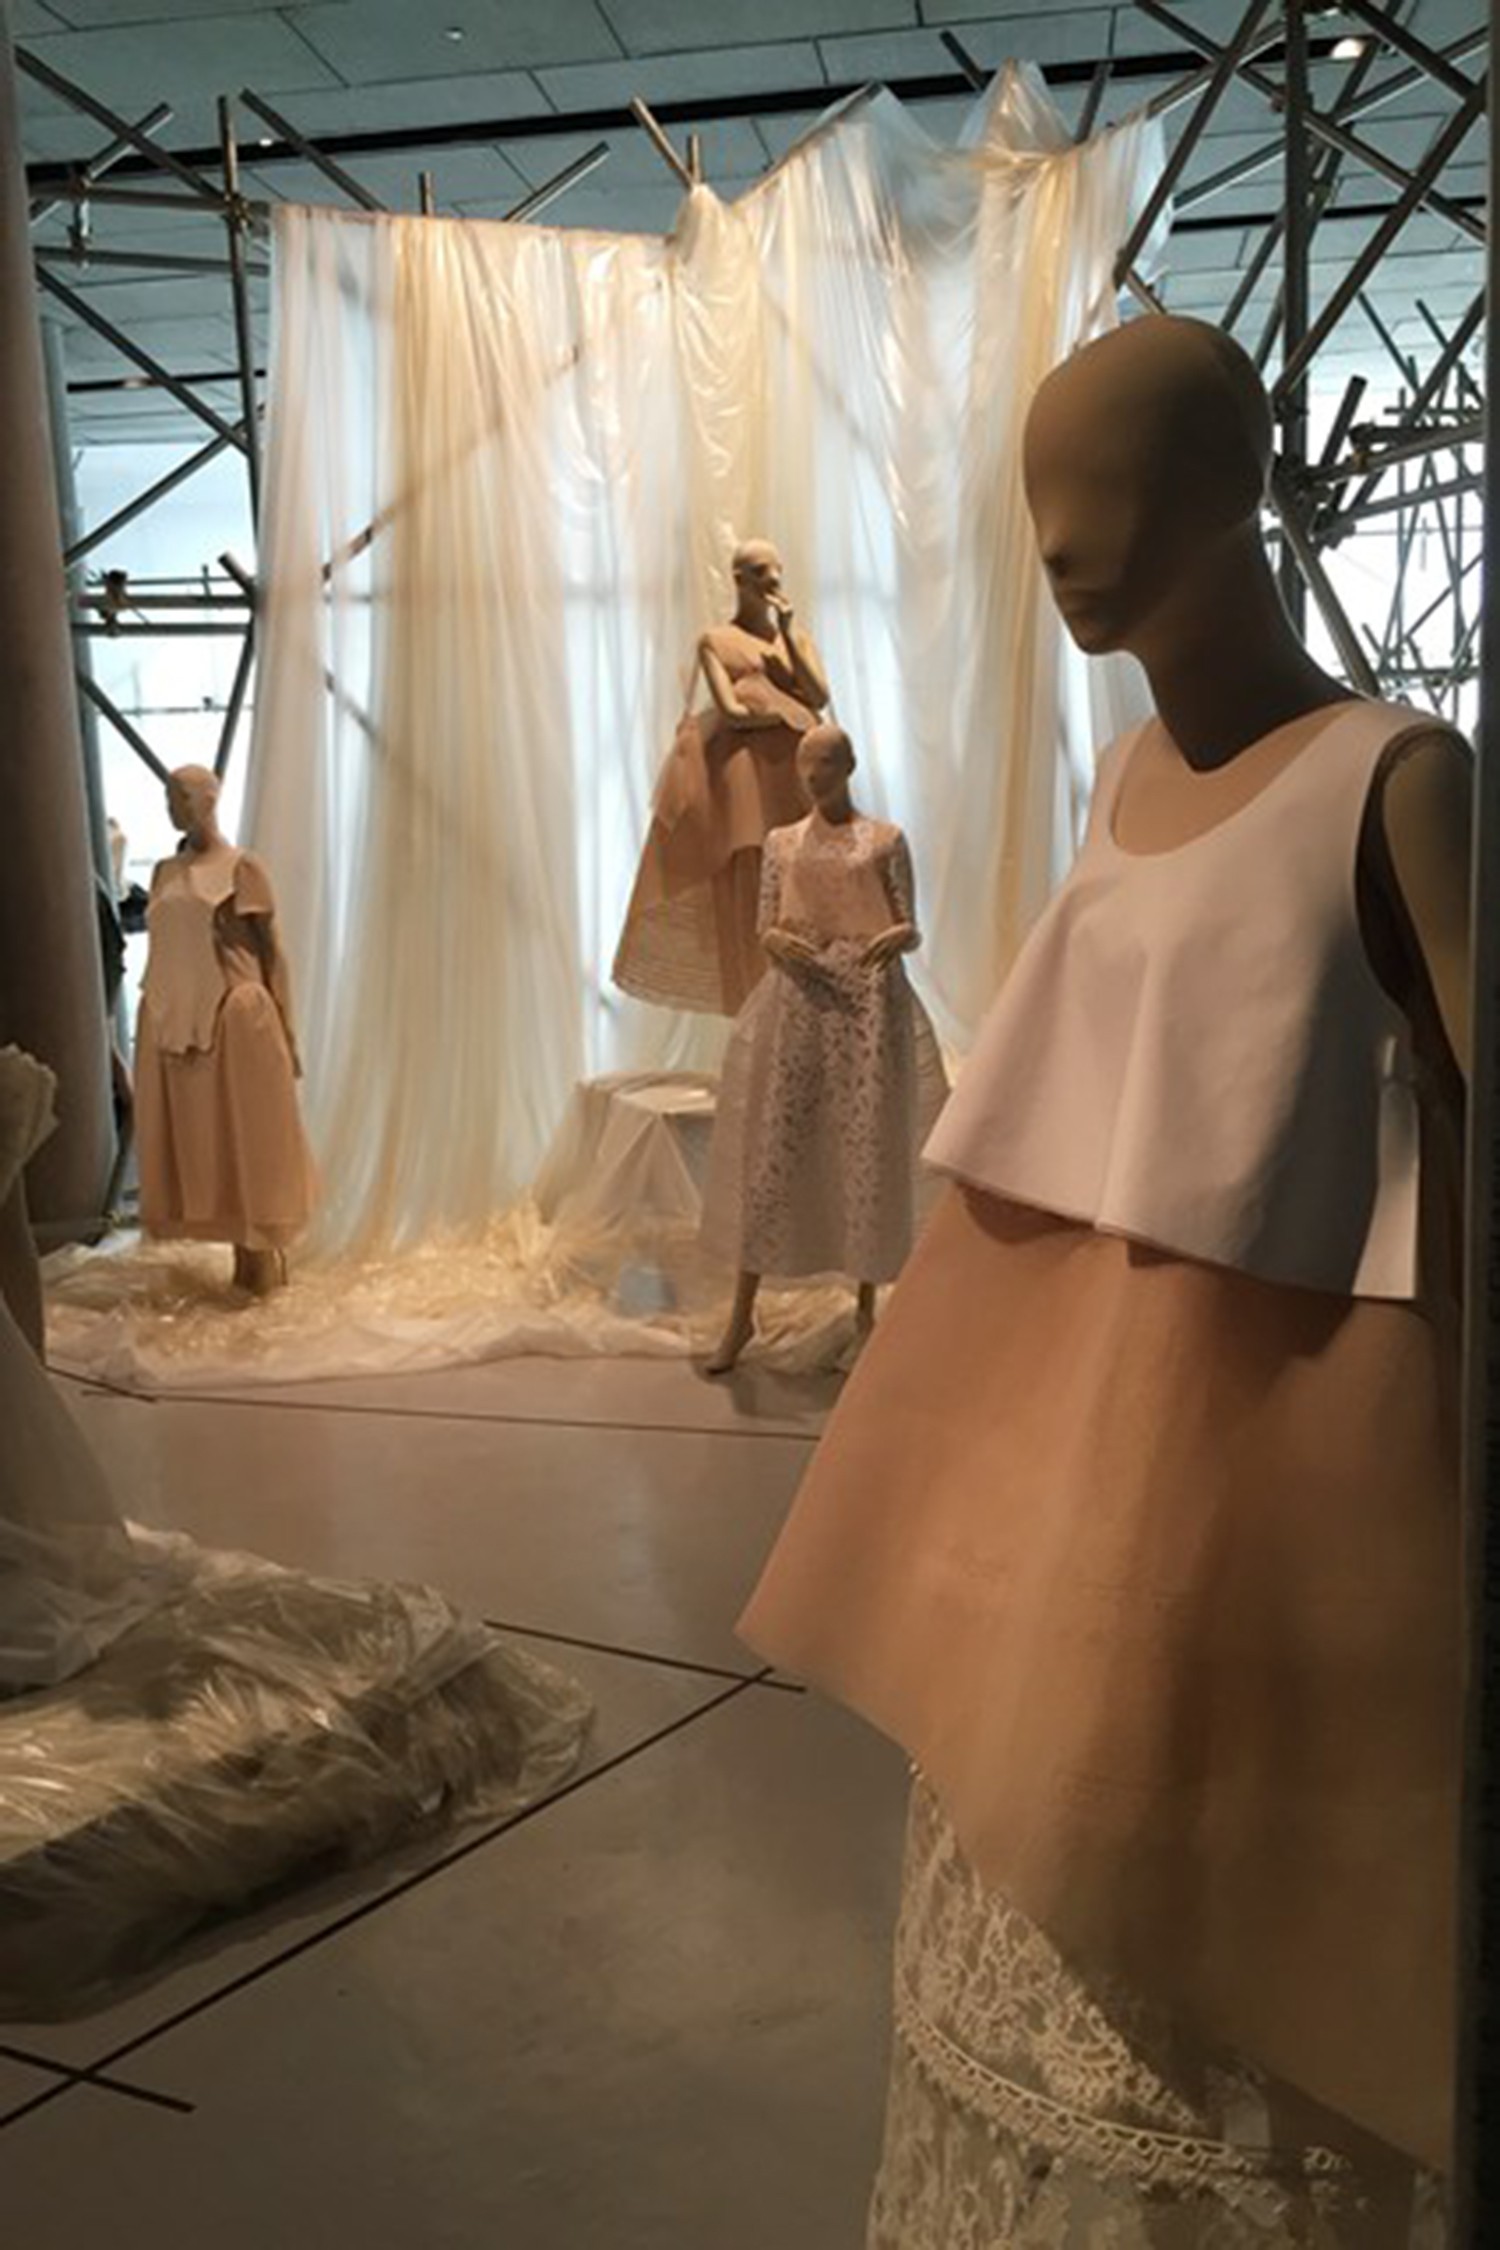 A field of pale shades at Jin Teok's exhibition in Seoul (Foto: Suzy Menkes Instagram)